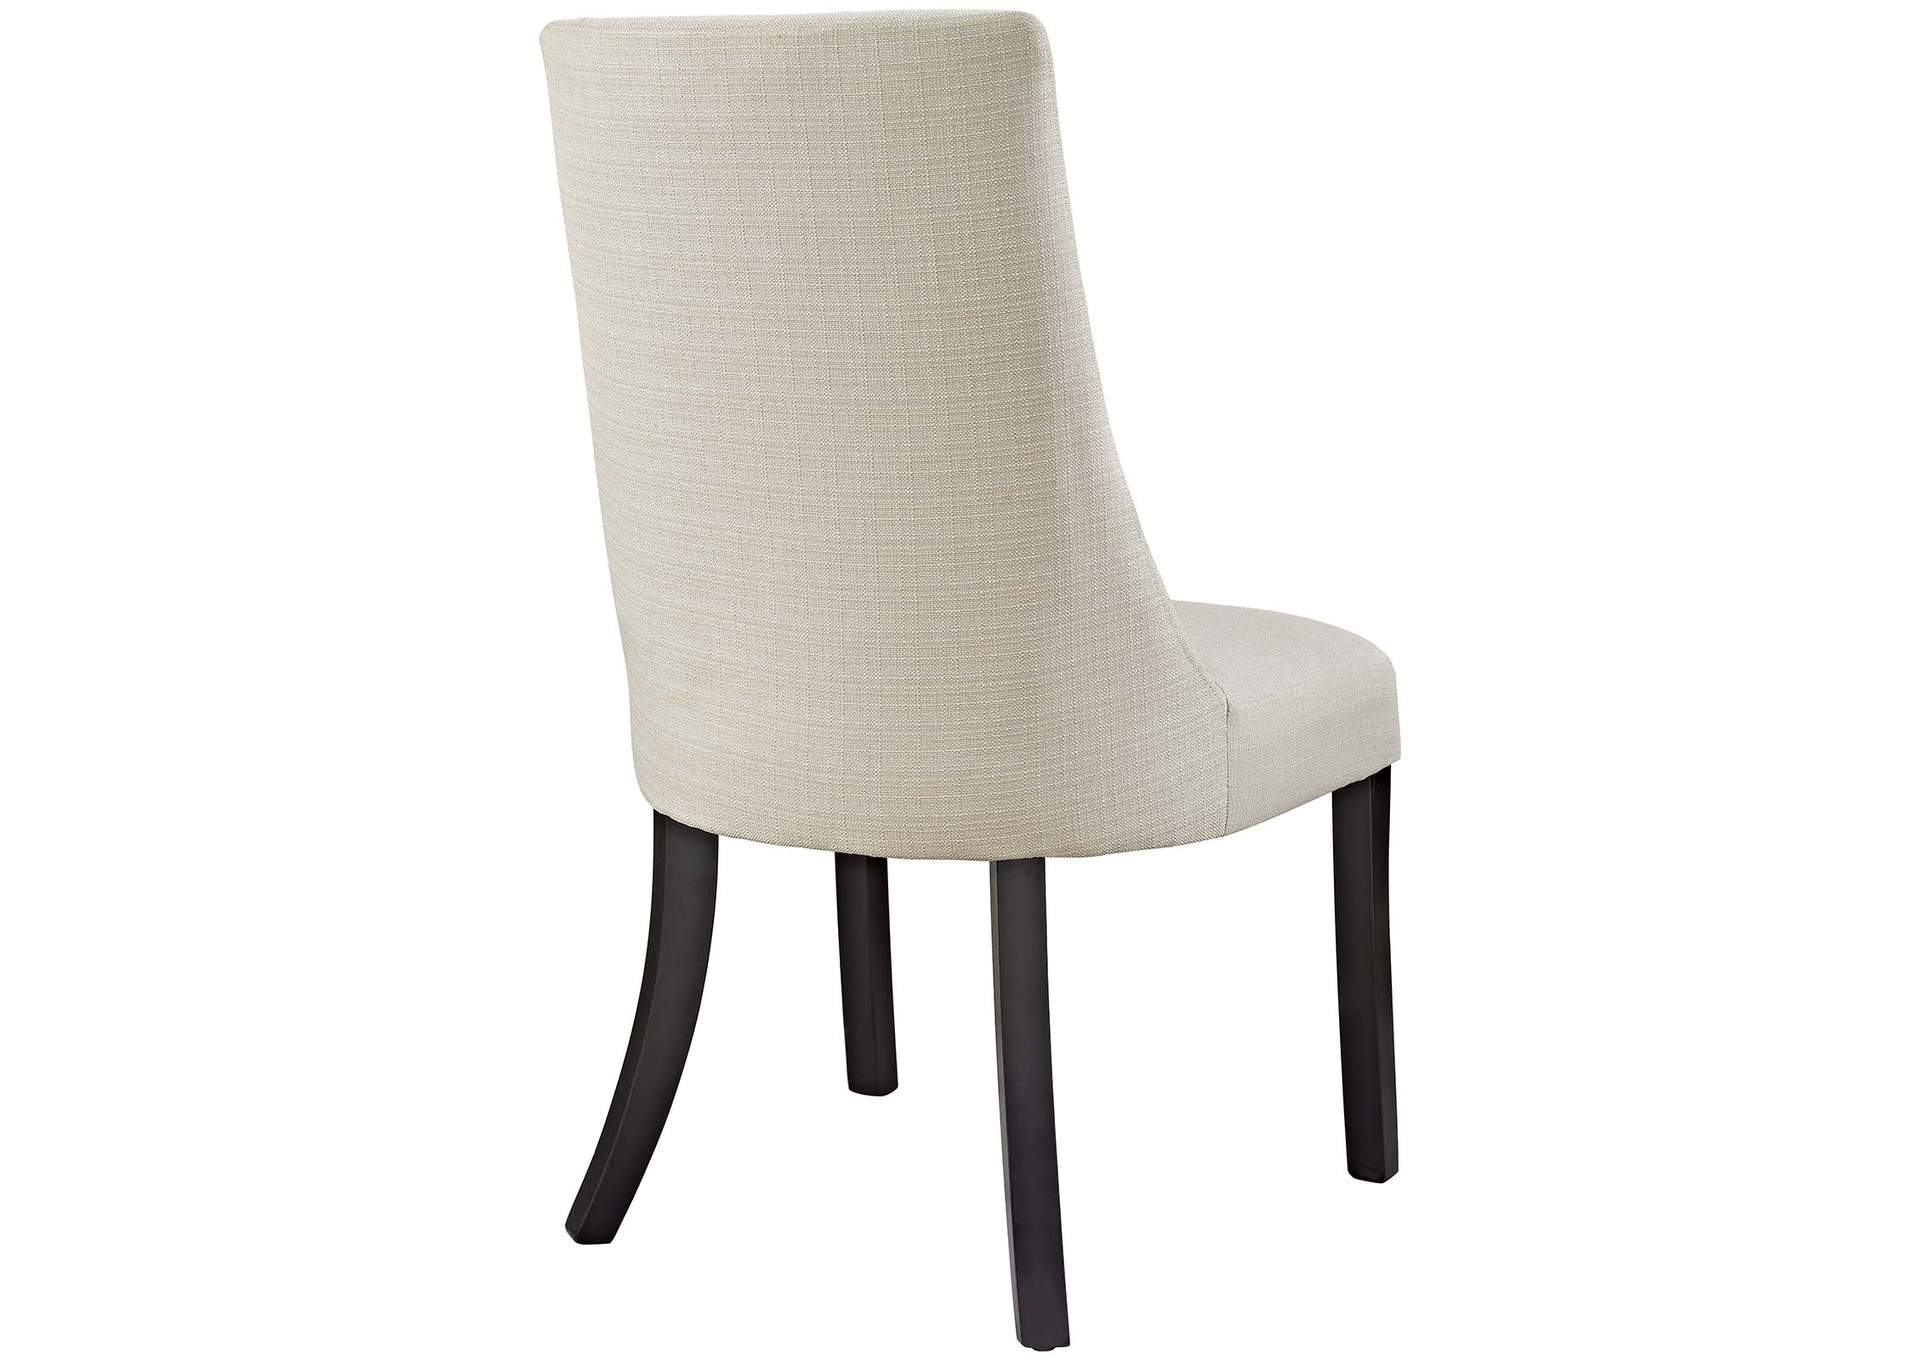 Beige Reverie Dining Side Chair,Modway